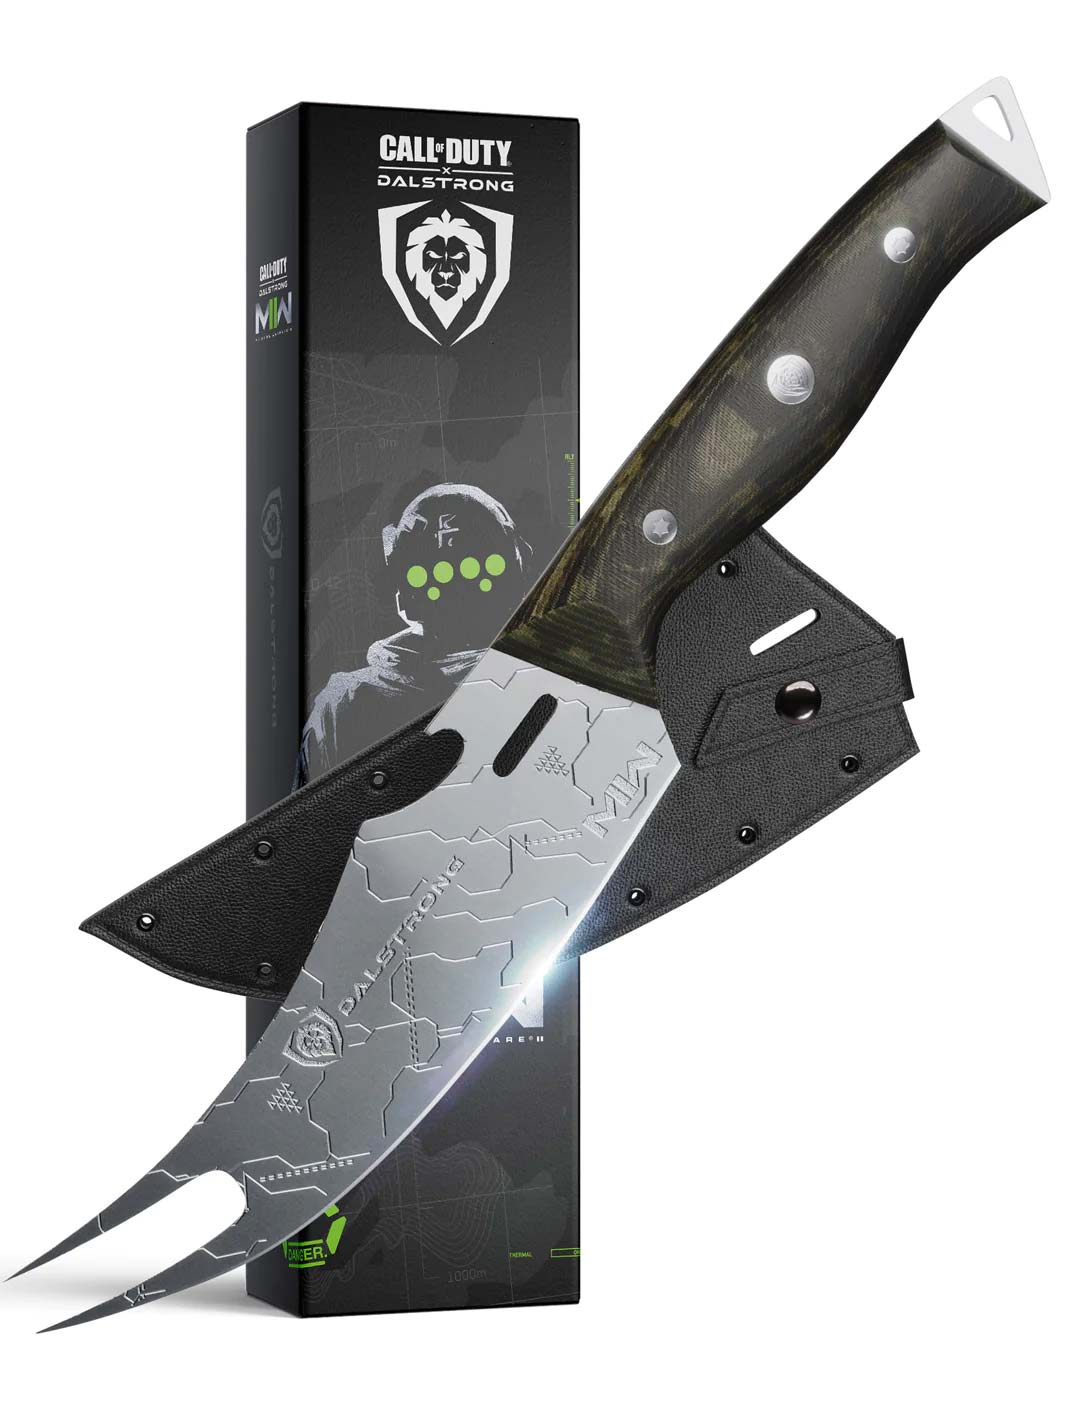 BBQ Pitmaster Knife 6.5" | Call of Duty © Edition | Forked Tip & Bottle Opener | EXCLUSIVE COLLECTOR KNIFE | Dalstrong ©